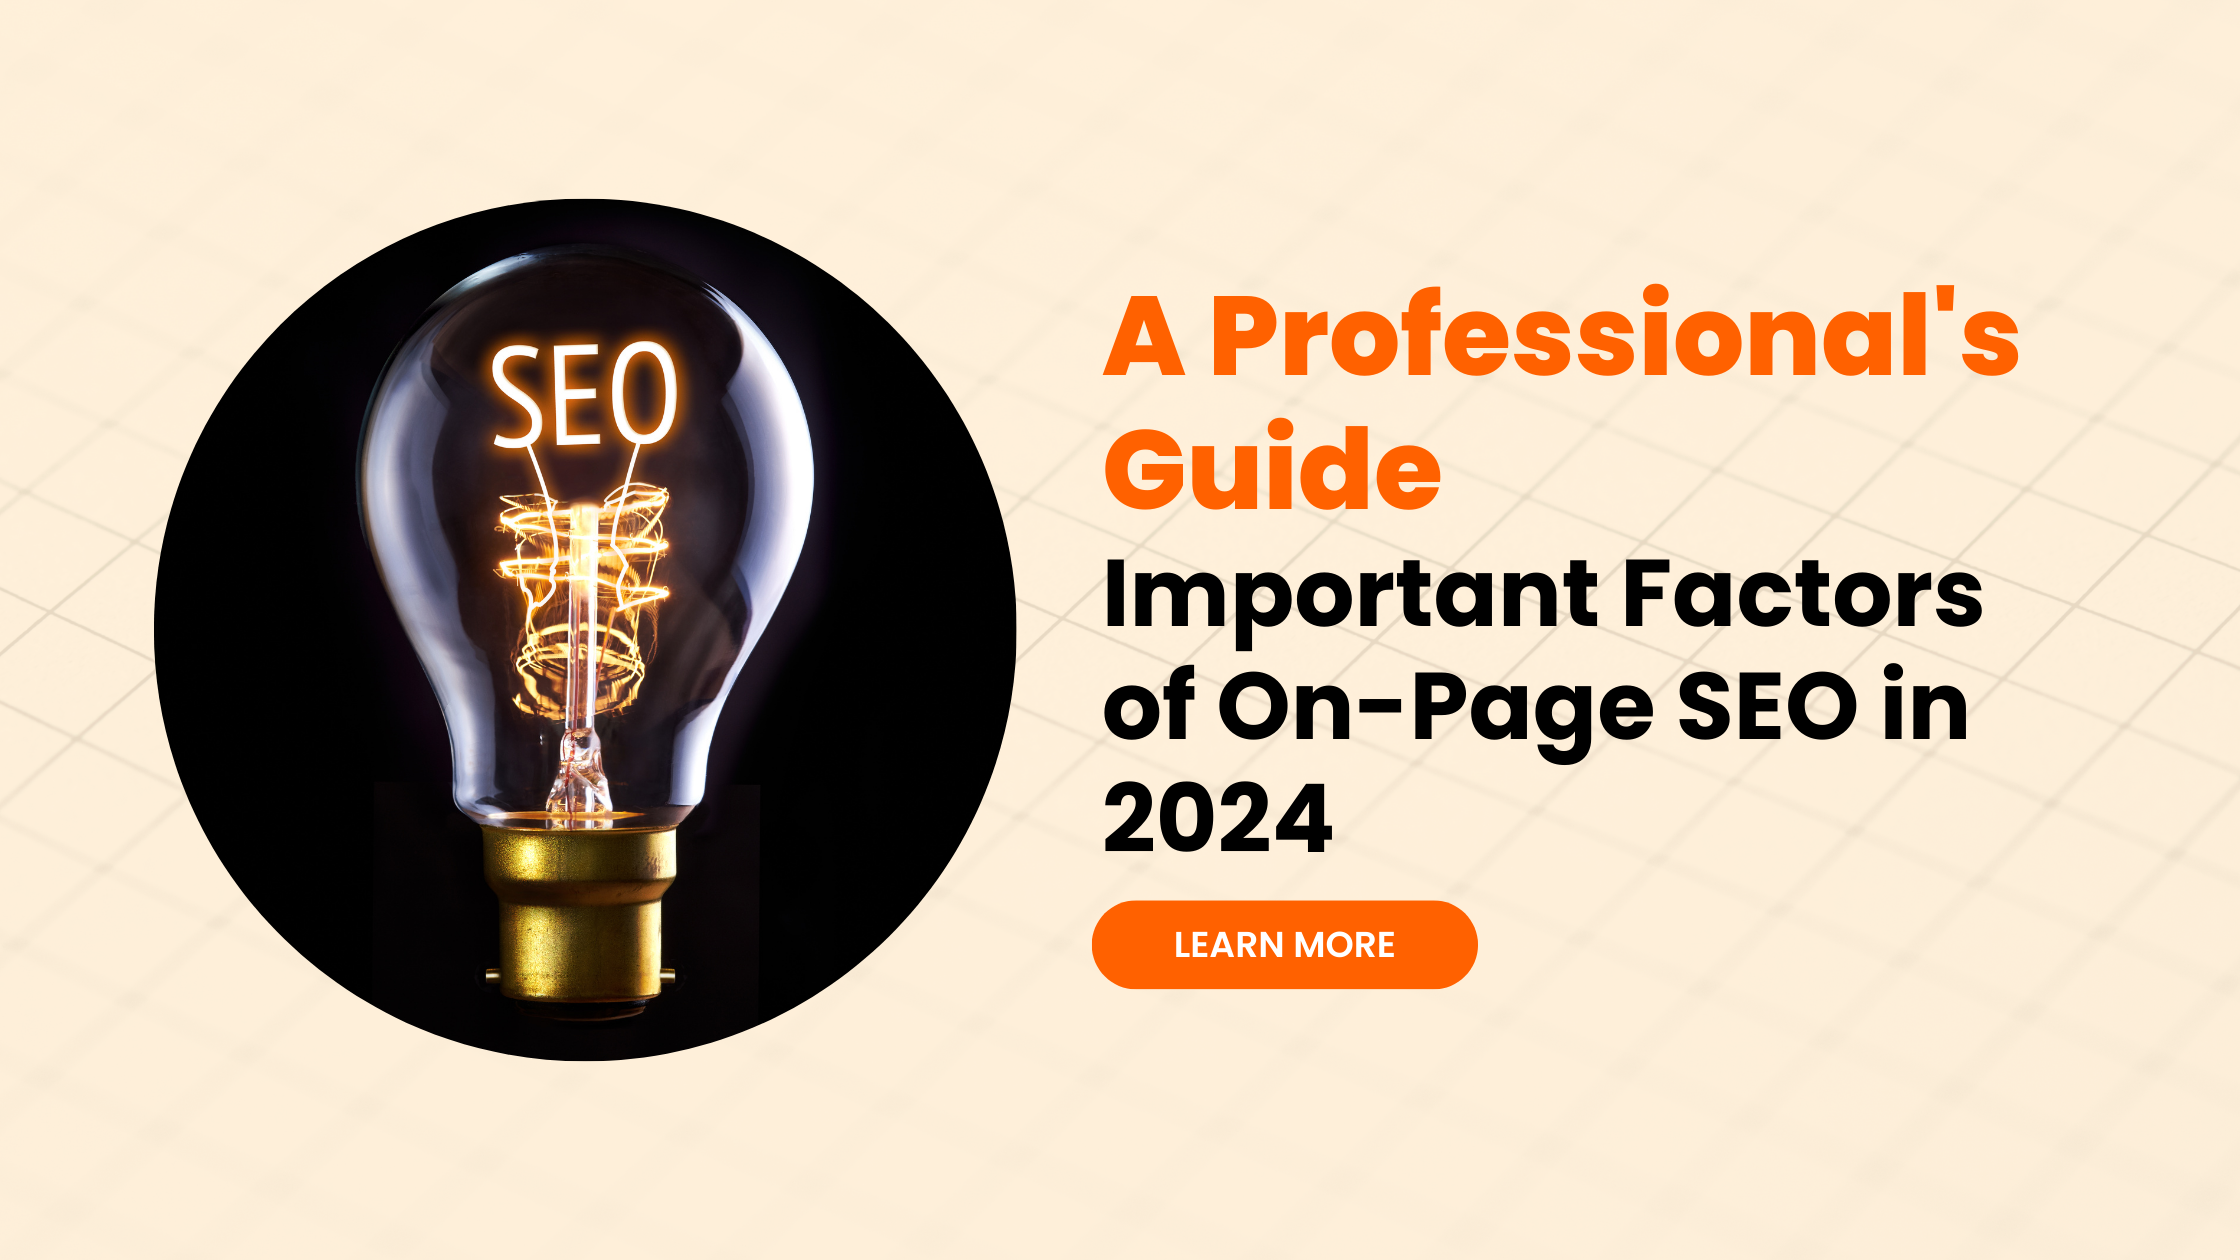 Important Factors of On-Page SEO in 2024